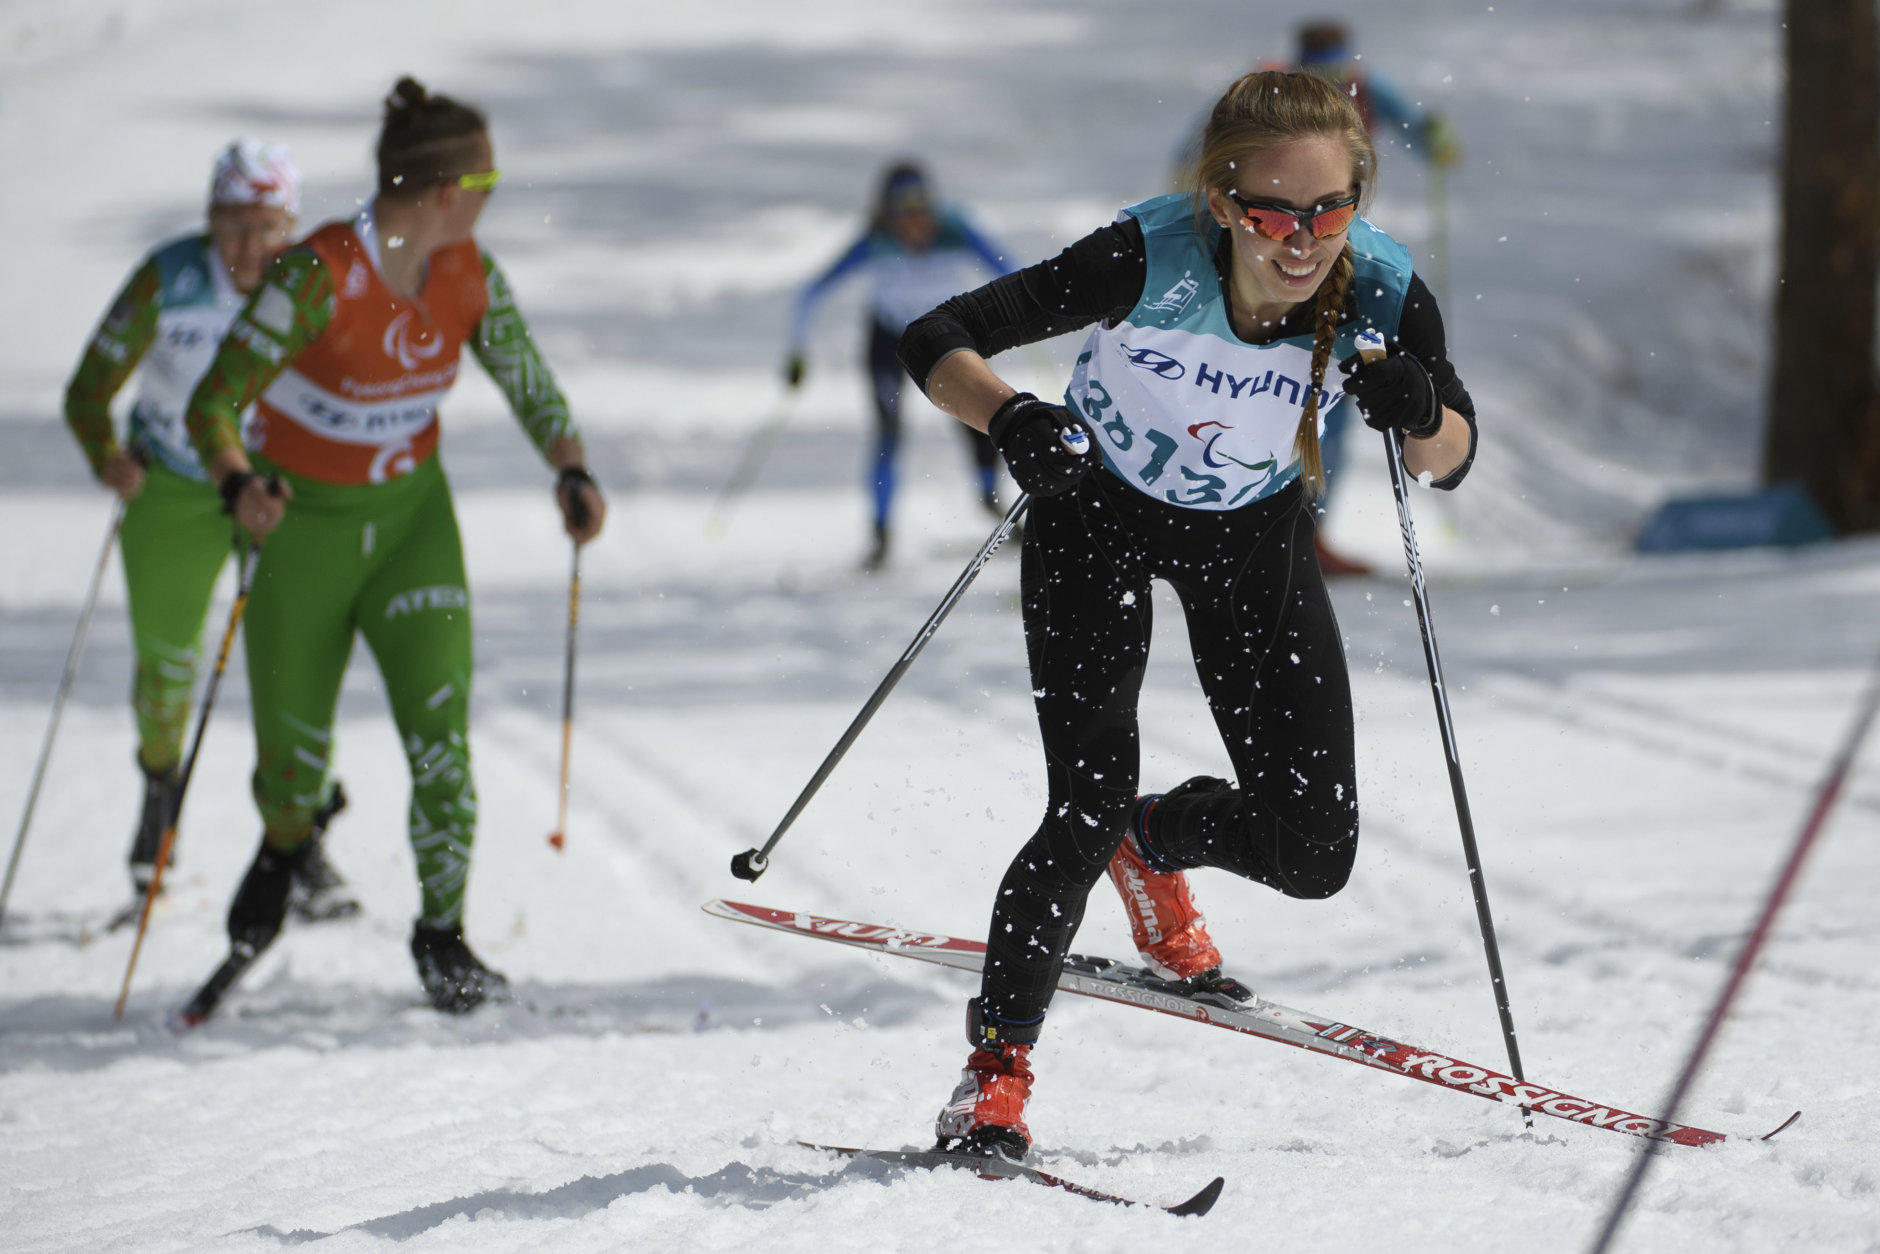 Mikhalina Lysova of Neutral Paralympic Athlete competes during the Cross Country Skiing Women's Visually Impaired 7,5km Classic at the Alpensia Biathlon Centre in Pyeongchang, South Korea at the 2018 Winter Paralympics Saturday, March 17, 2018. (Thomas Lovelock/OIS/IOC via AP)